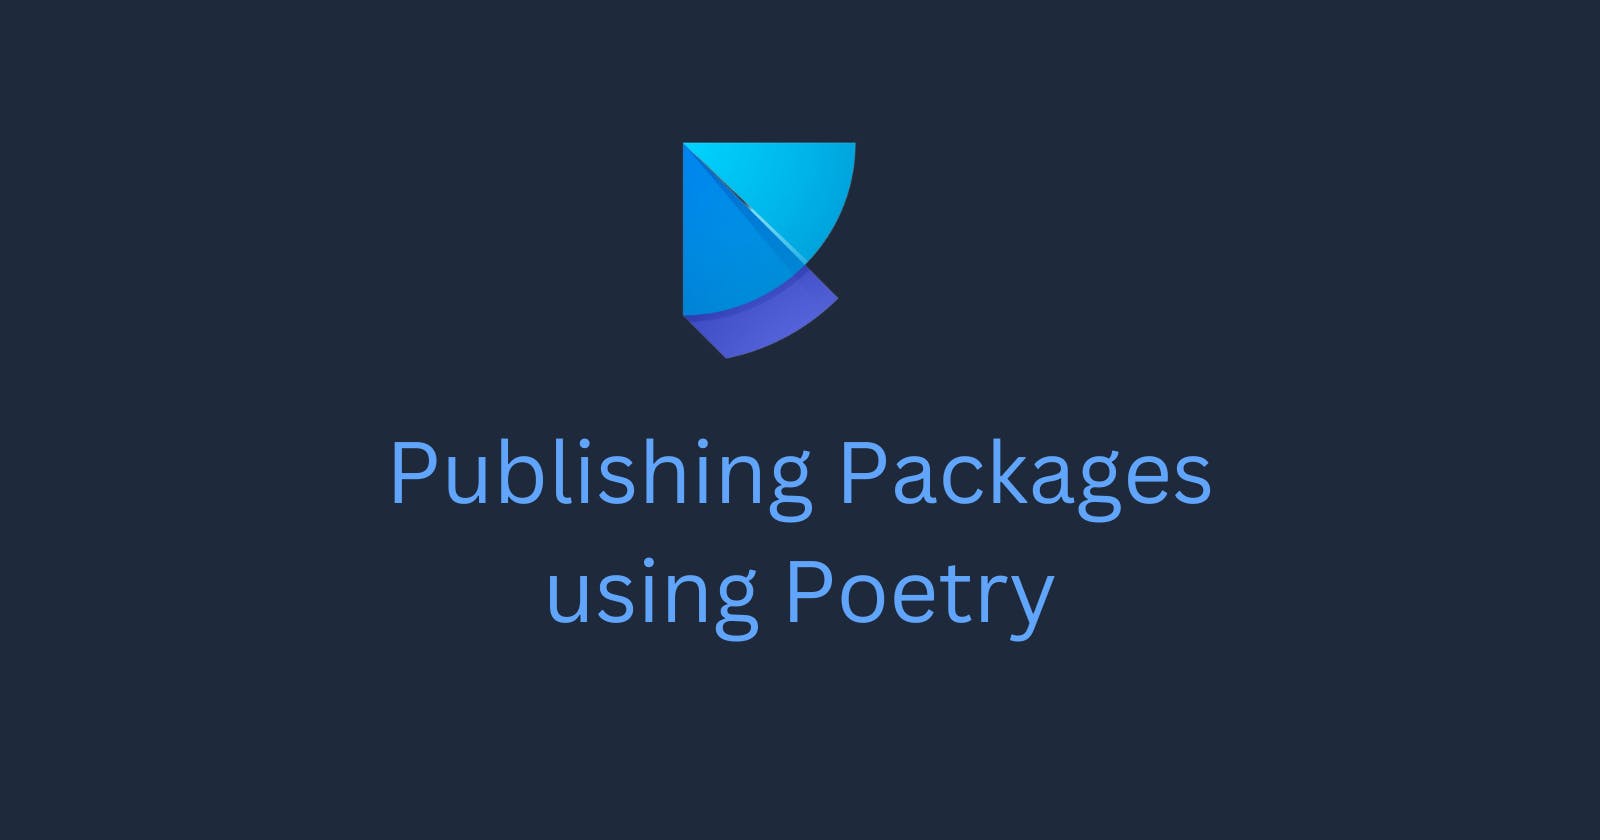 Publishing Packages using Poetry